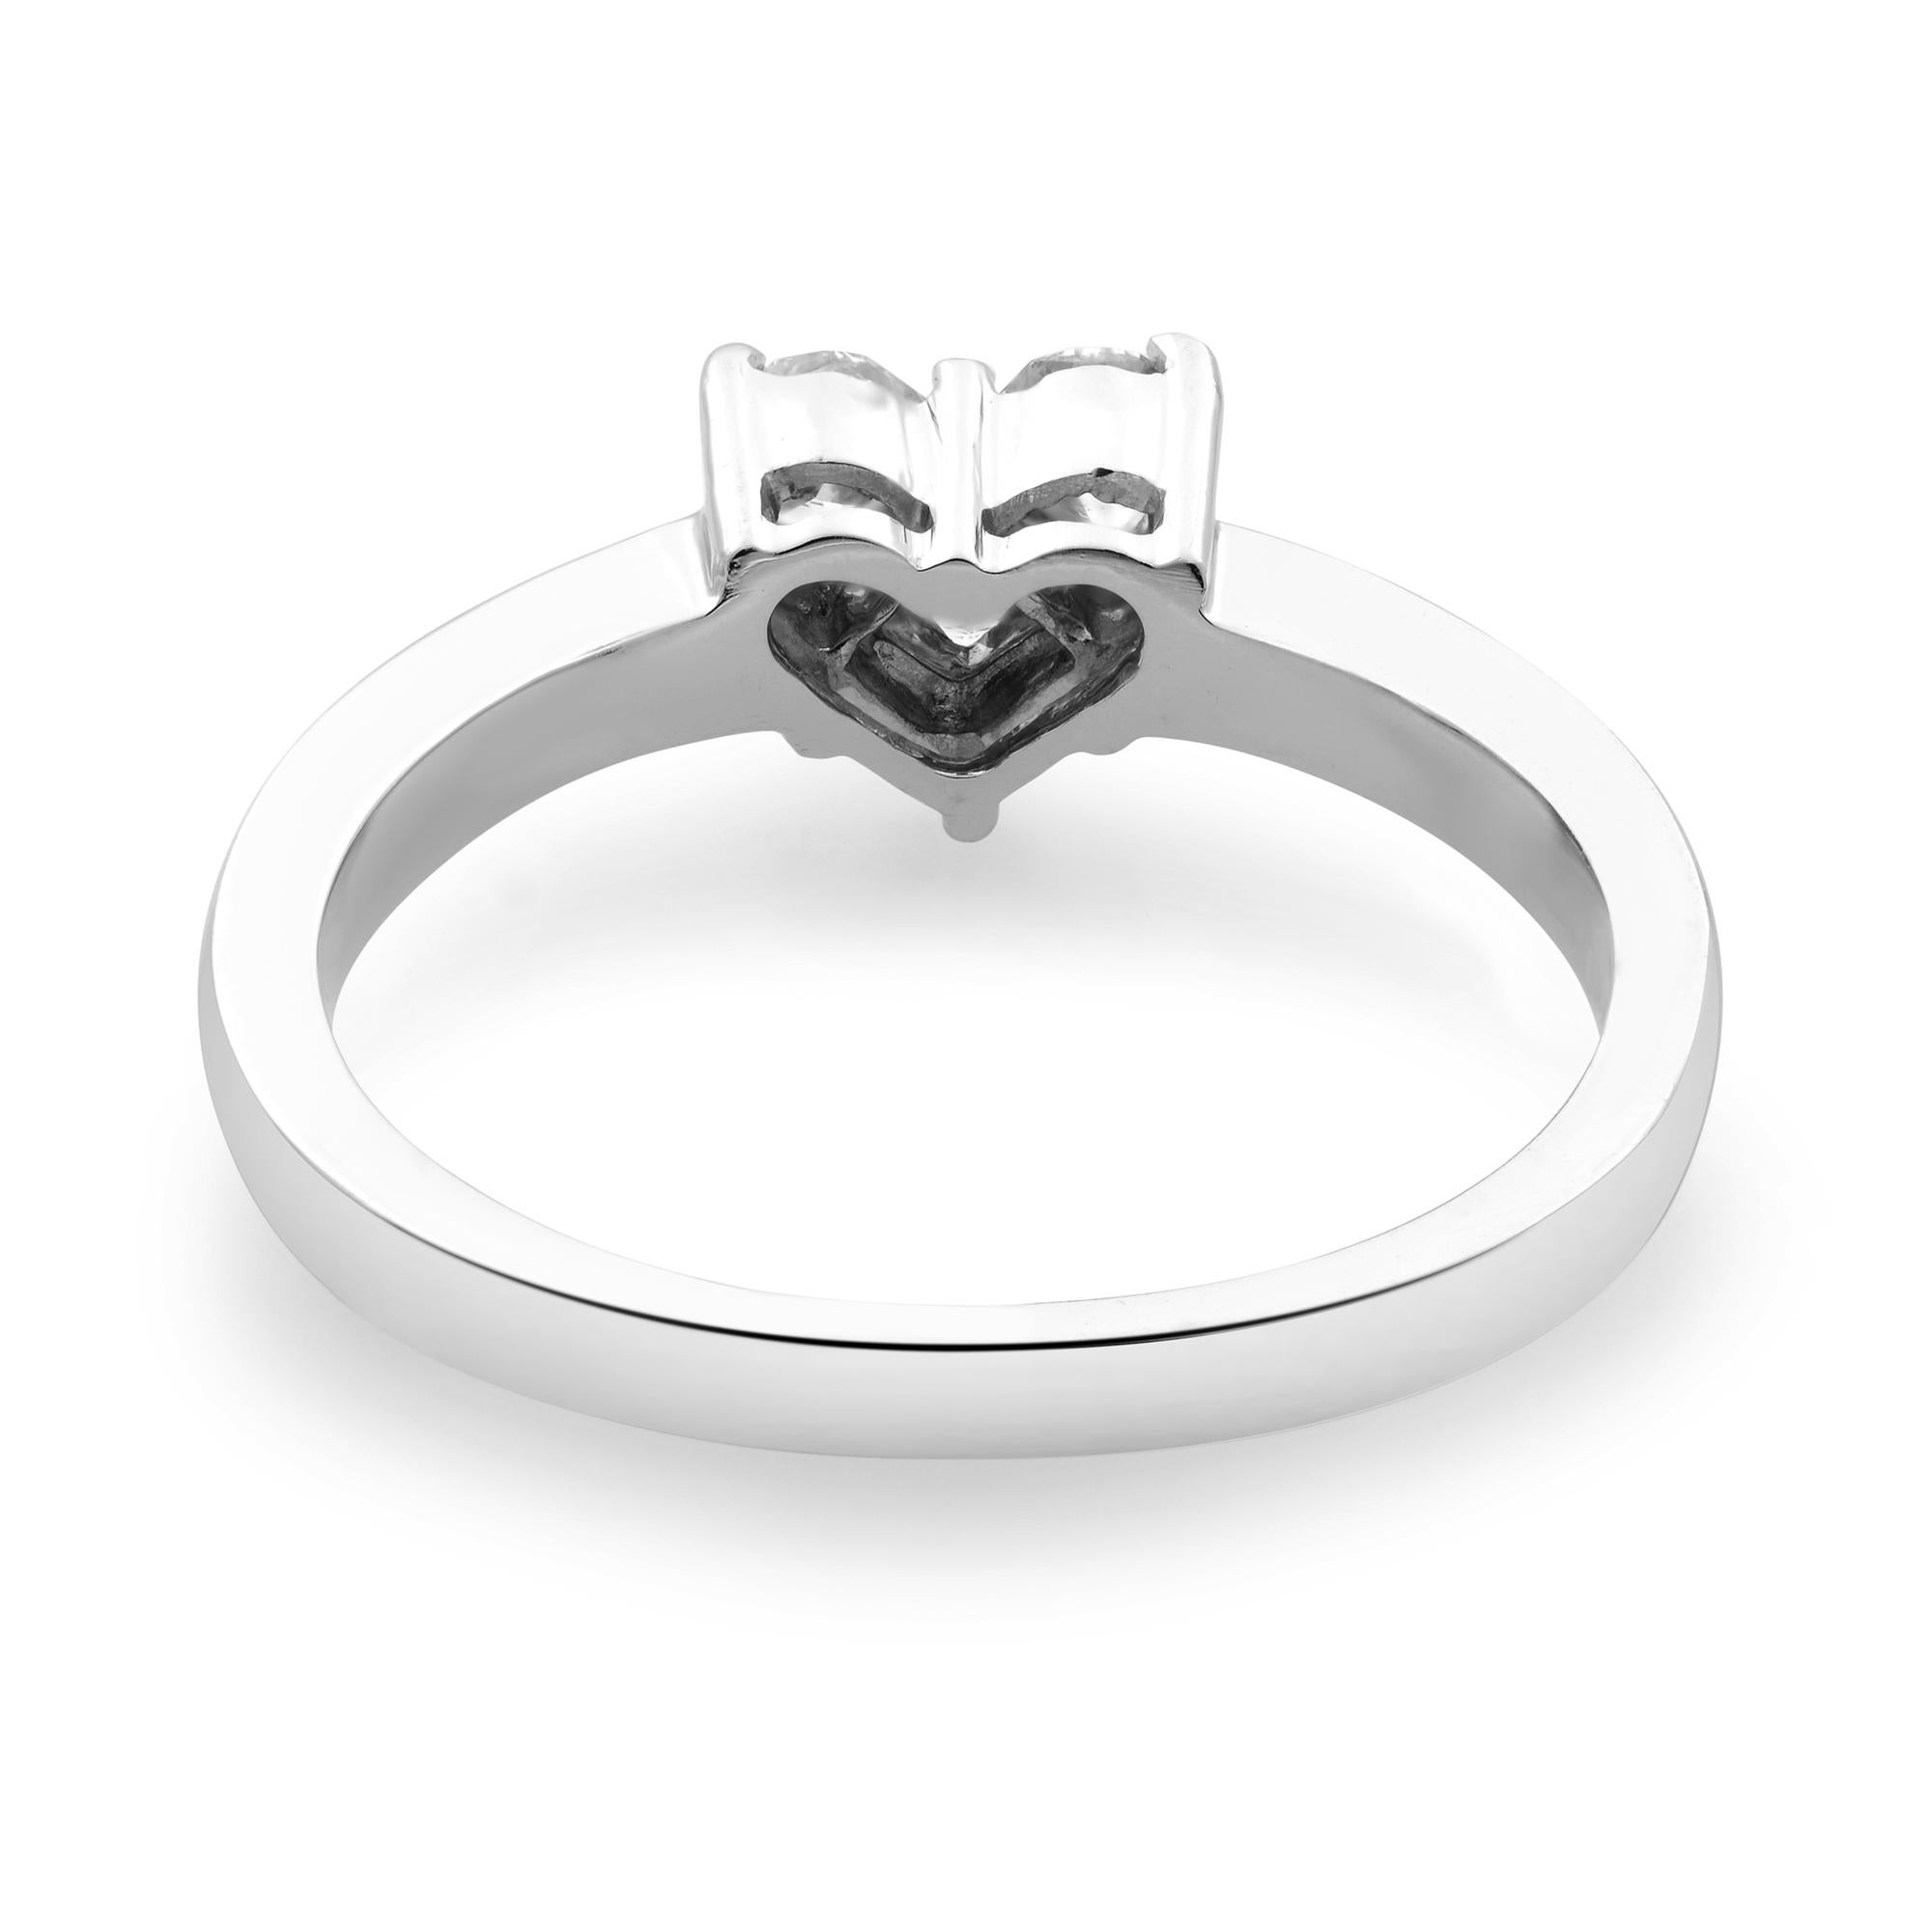 Rachel Koen Heart Shaped Diamond Ladies Ring 14K White Gold 0.50Cttw In Excellent Condition For Sale In New York, NY